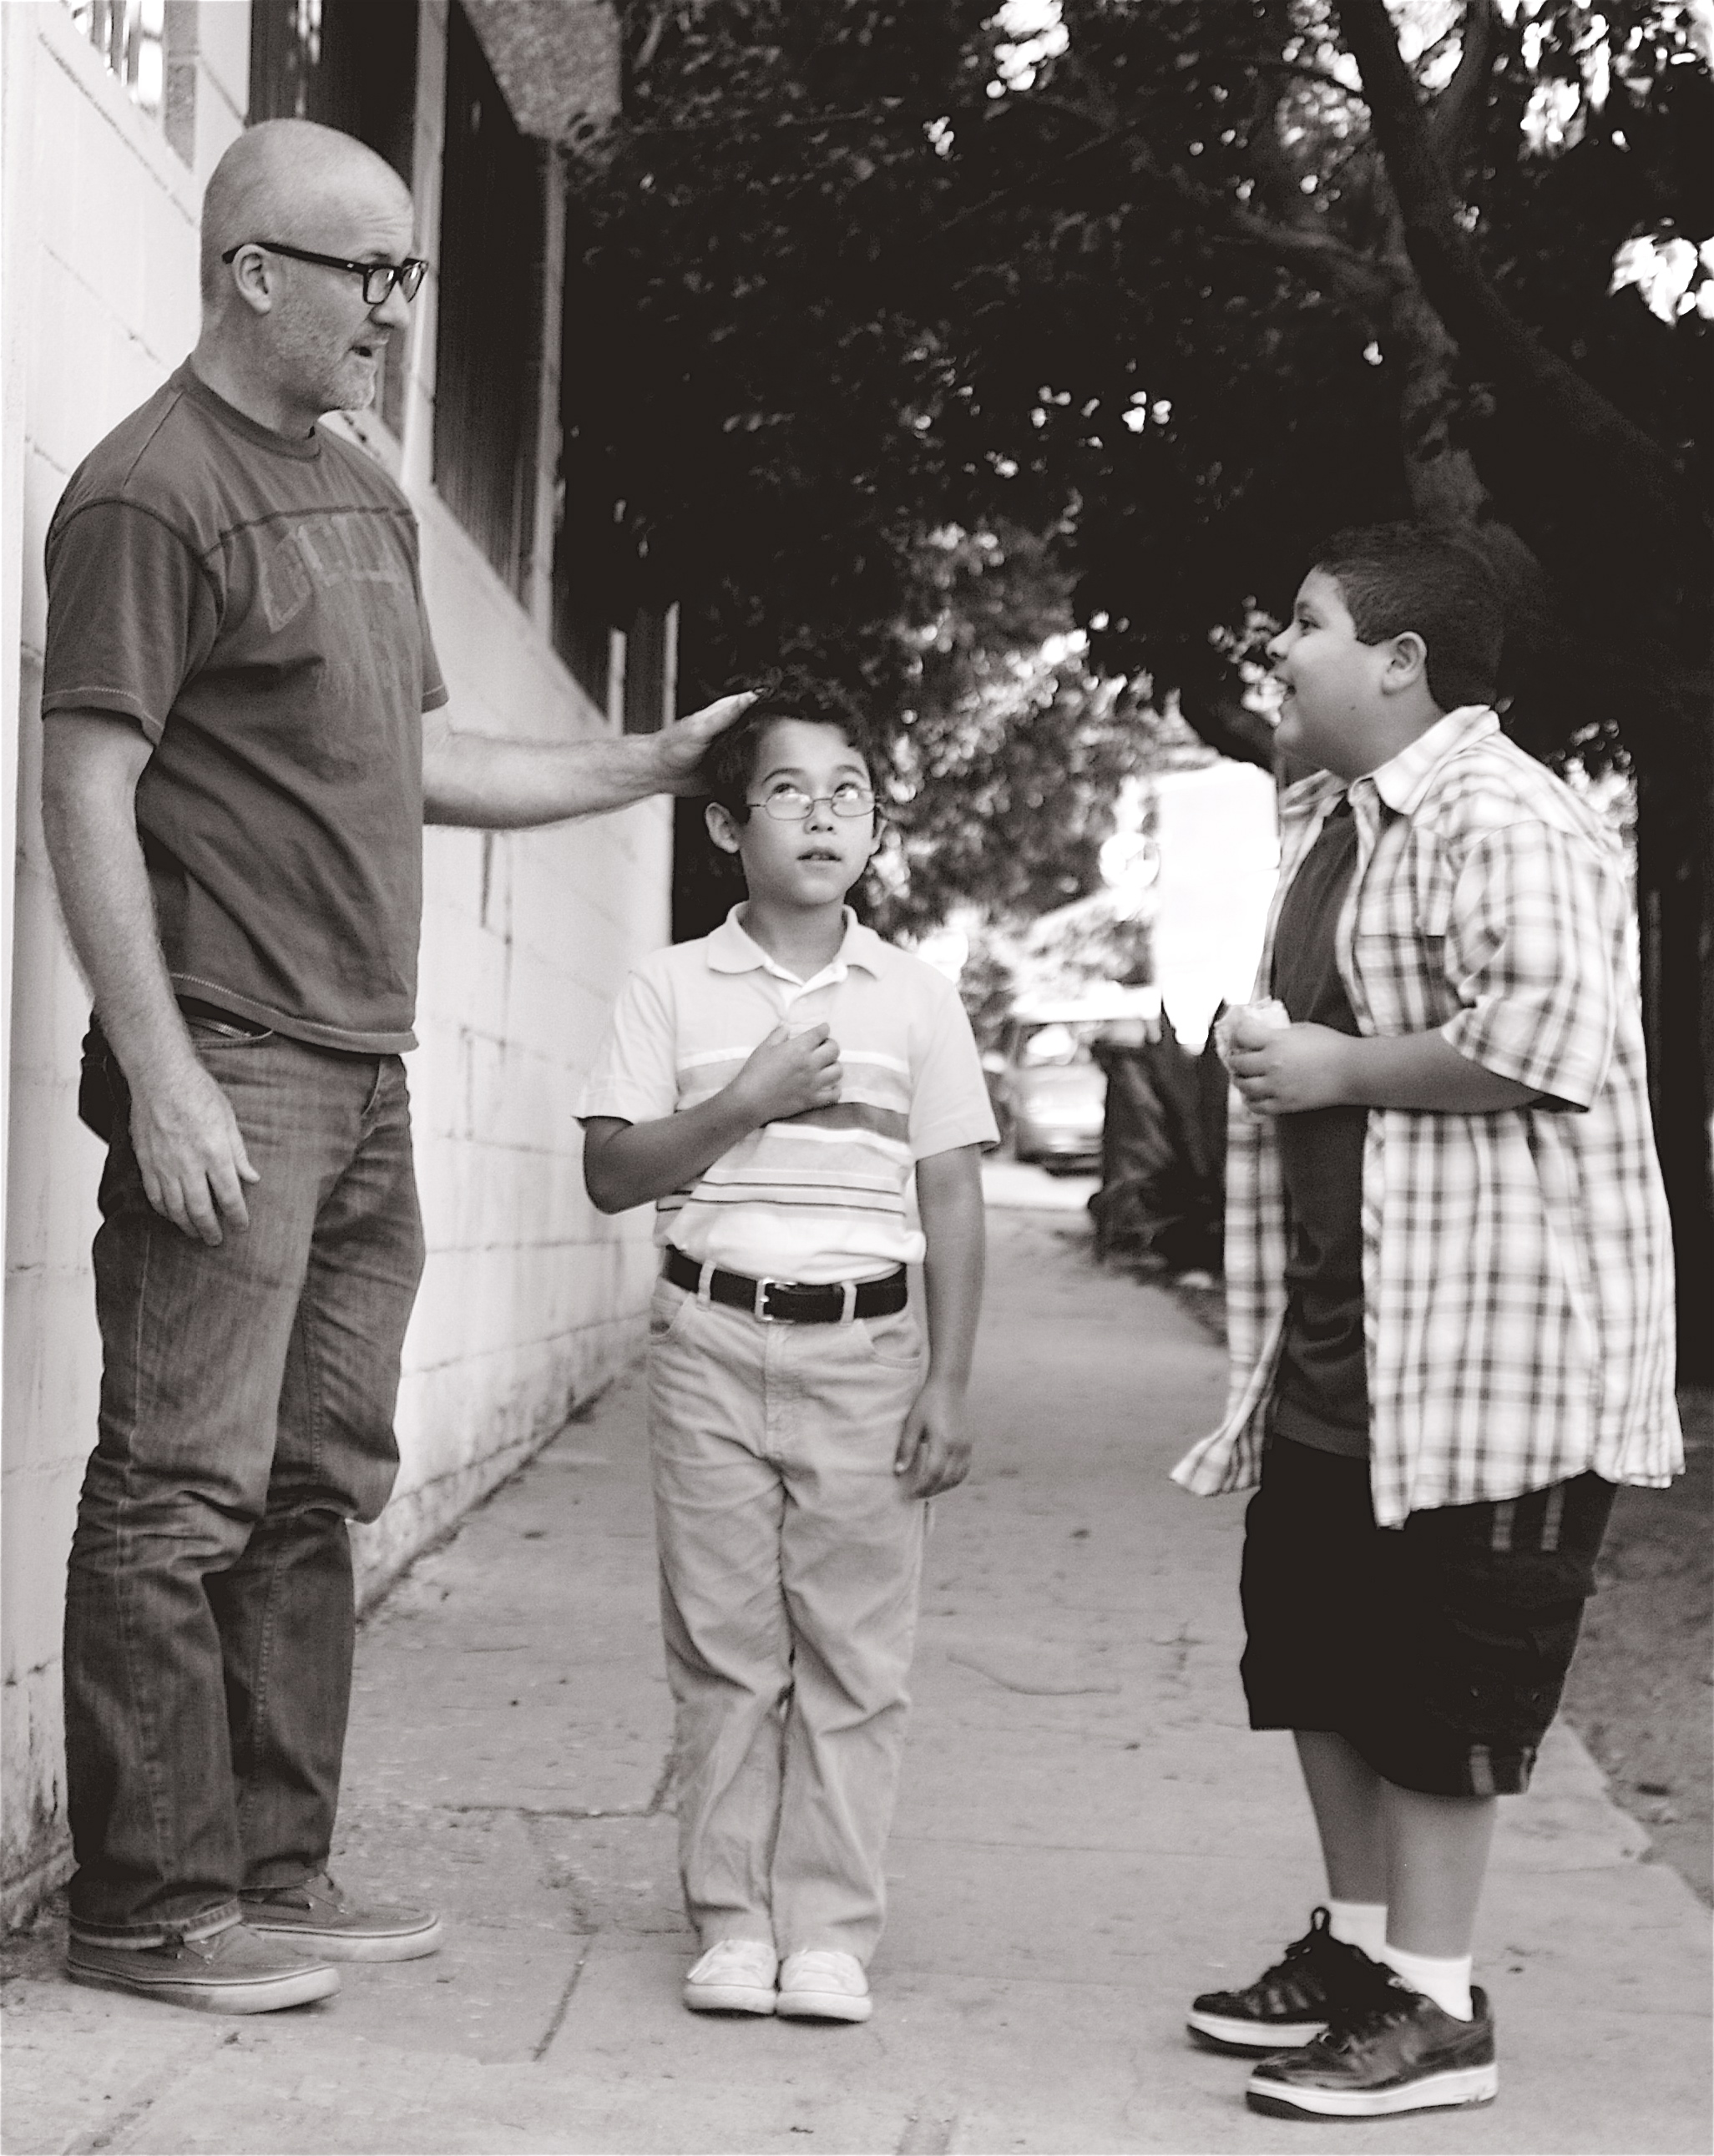 James Hanlon directing on the set of Philippe's Sandwich, with Rico Rodriguez and Juan Martinez in Los Angeles.